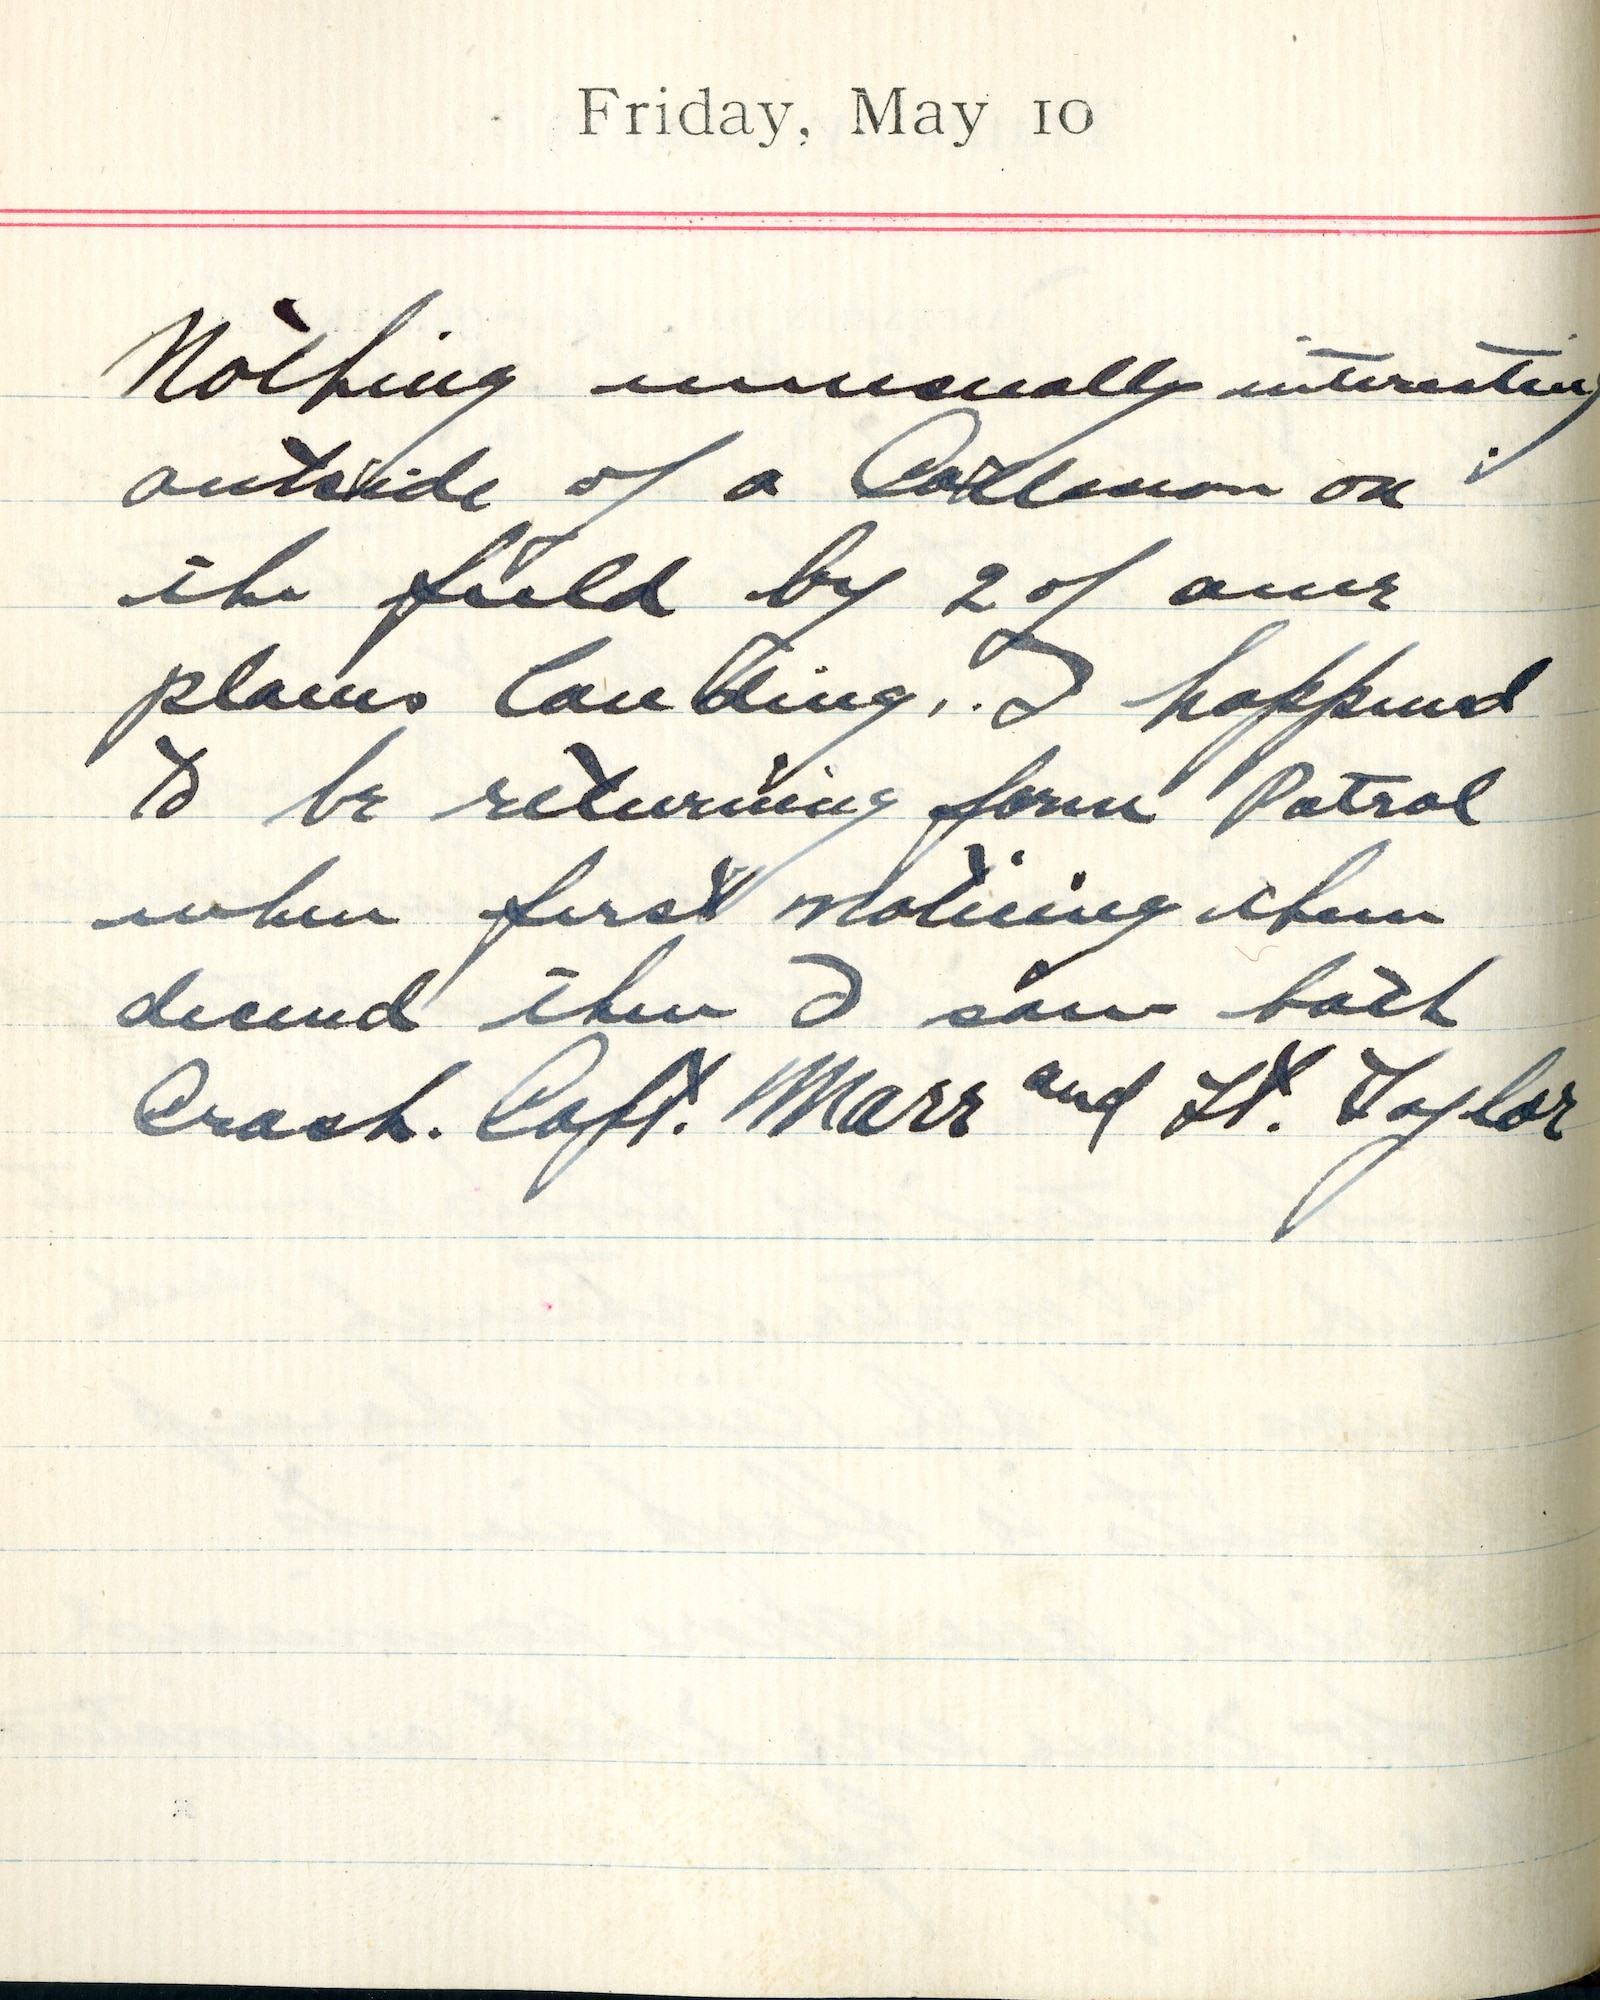 Capt. Edward V. Rickenbacker's 1918 wartime diary entry. (05/10/1918).

Nothing unusually interesting outside of a collision on the field by 2 of our planes landing.  I happened to be returning from patrol when first noticing them descend, then I saw both crash.  Capt. Marr and Lt. Taylor.